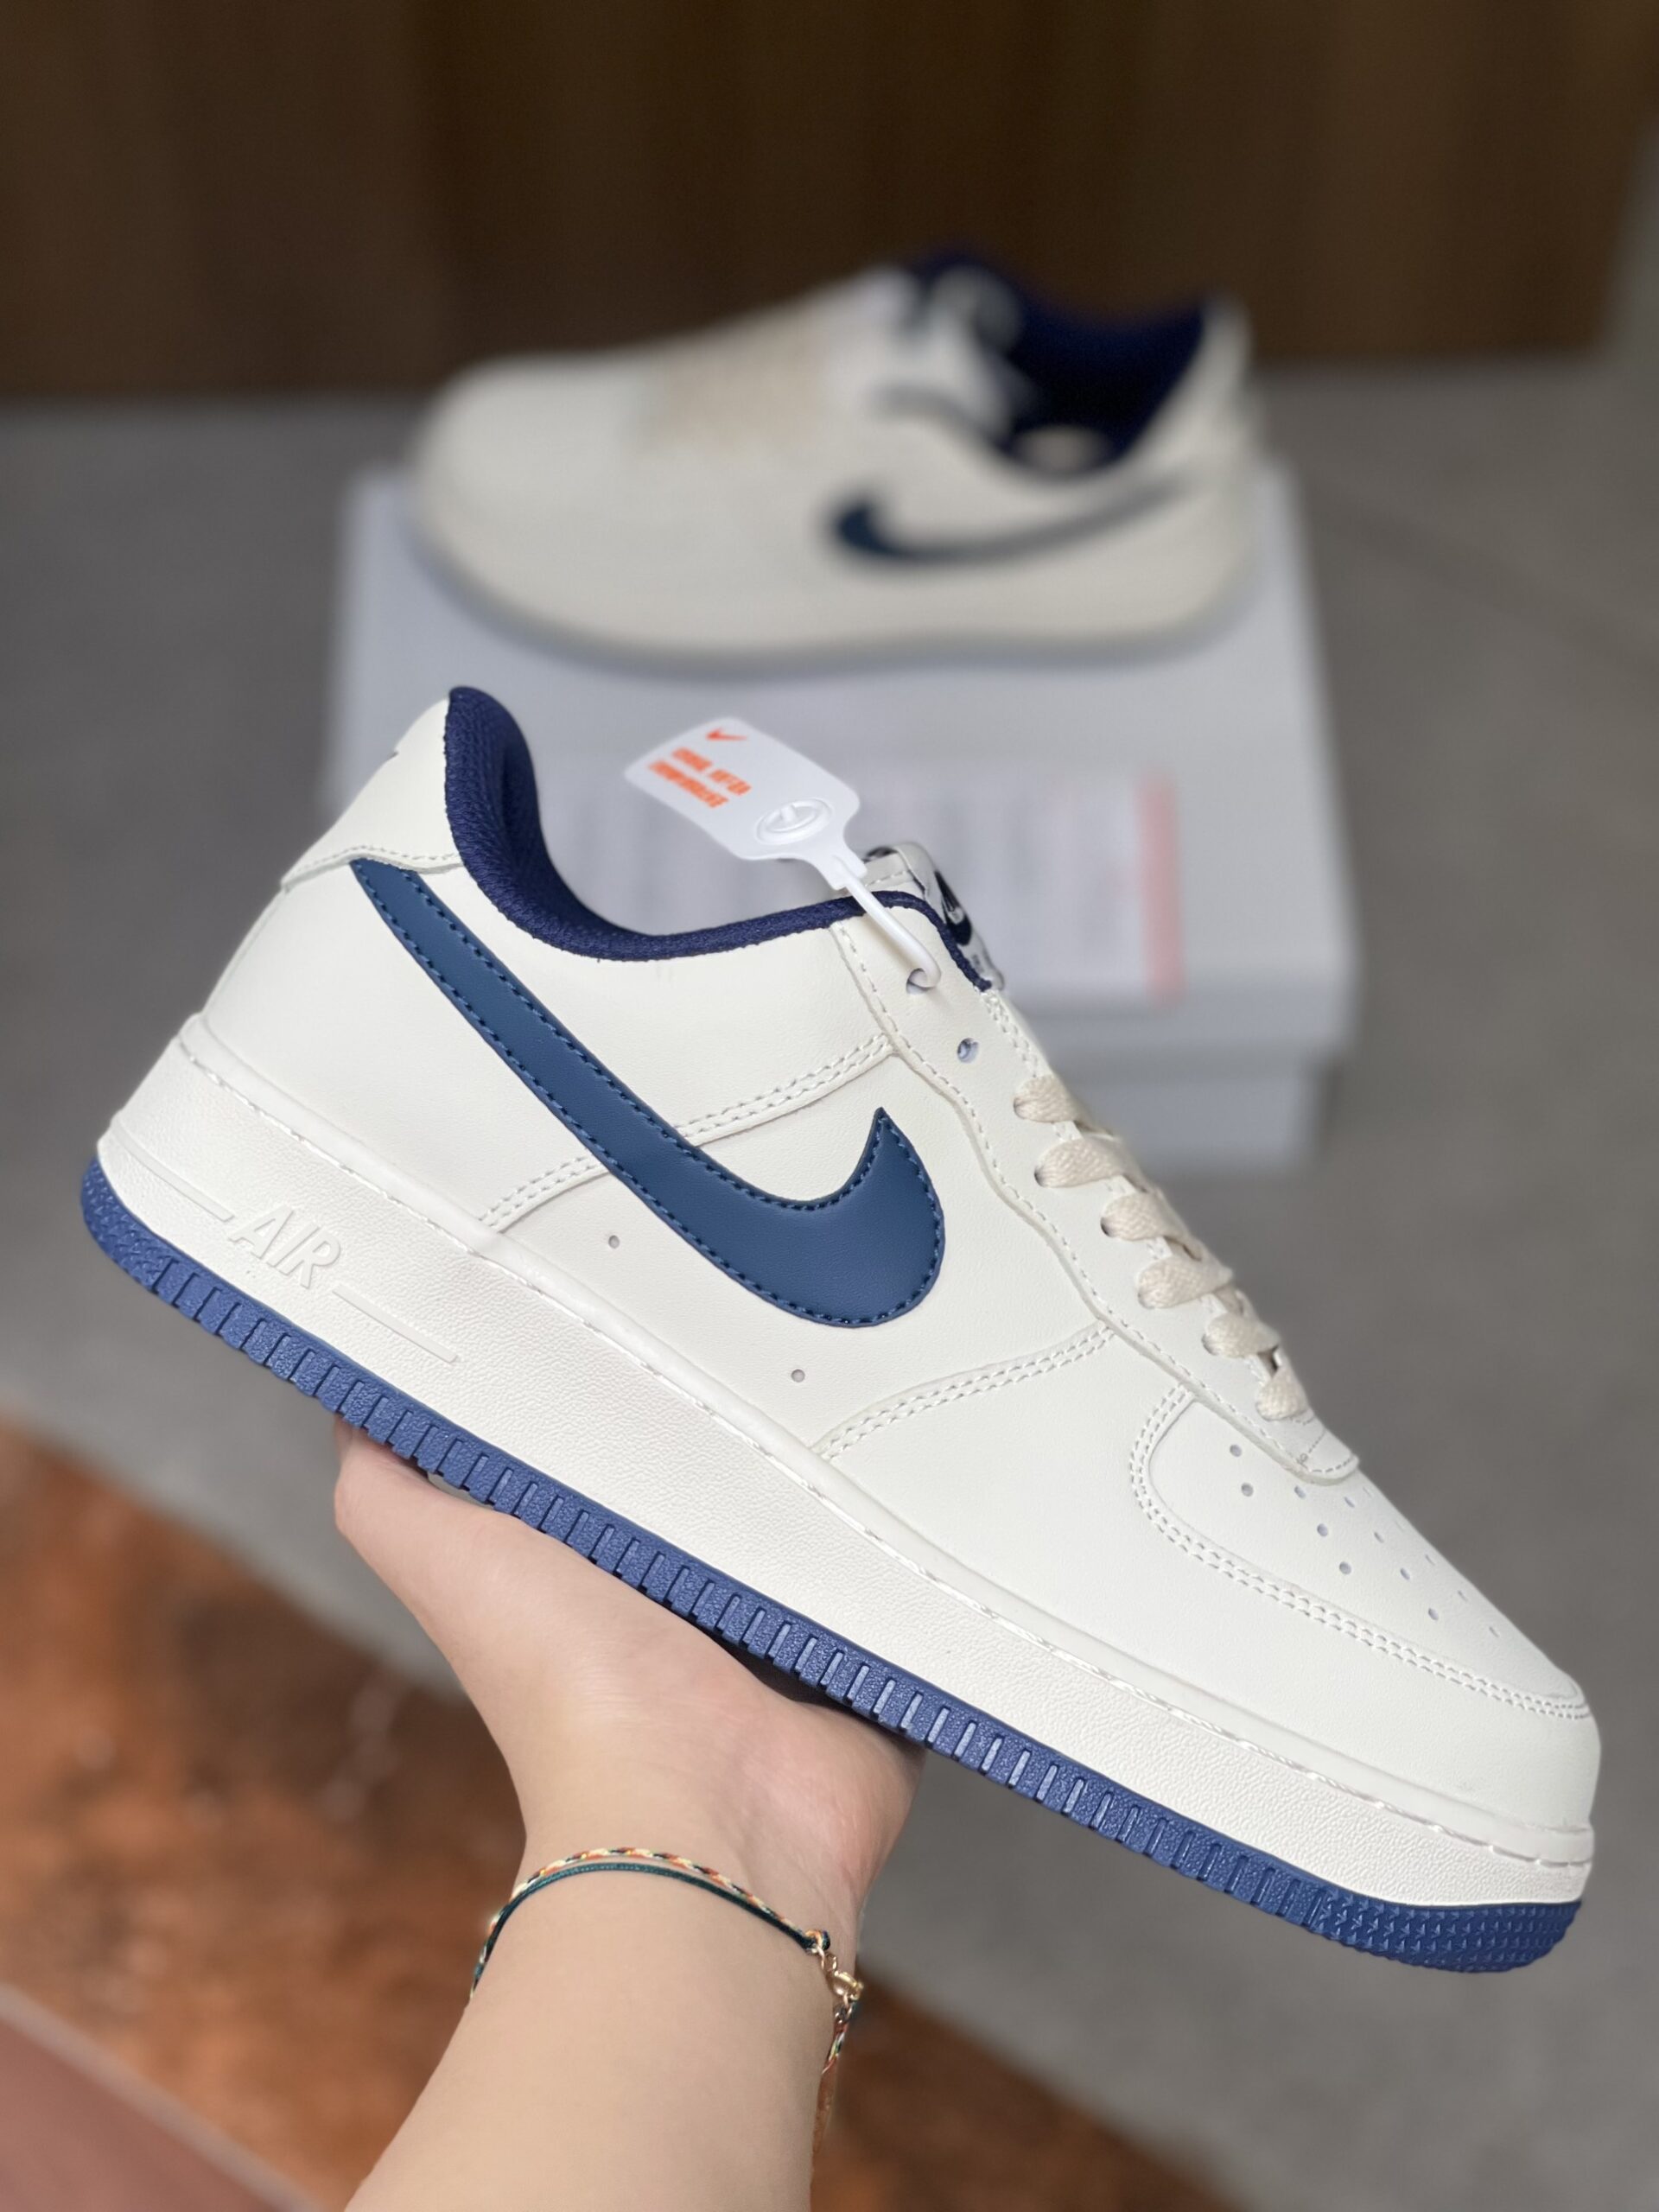 Giày Nike Air Force 1 Low 07 Cream White Navy Skate Like Auth